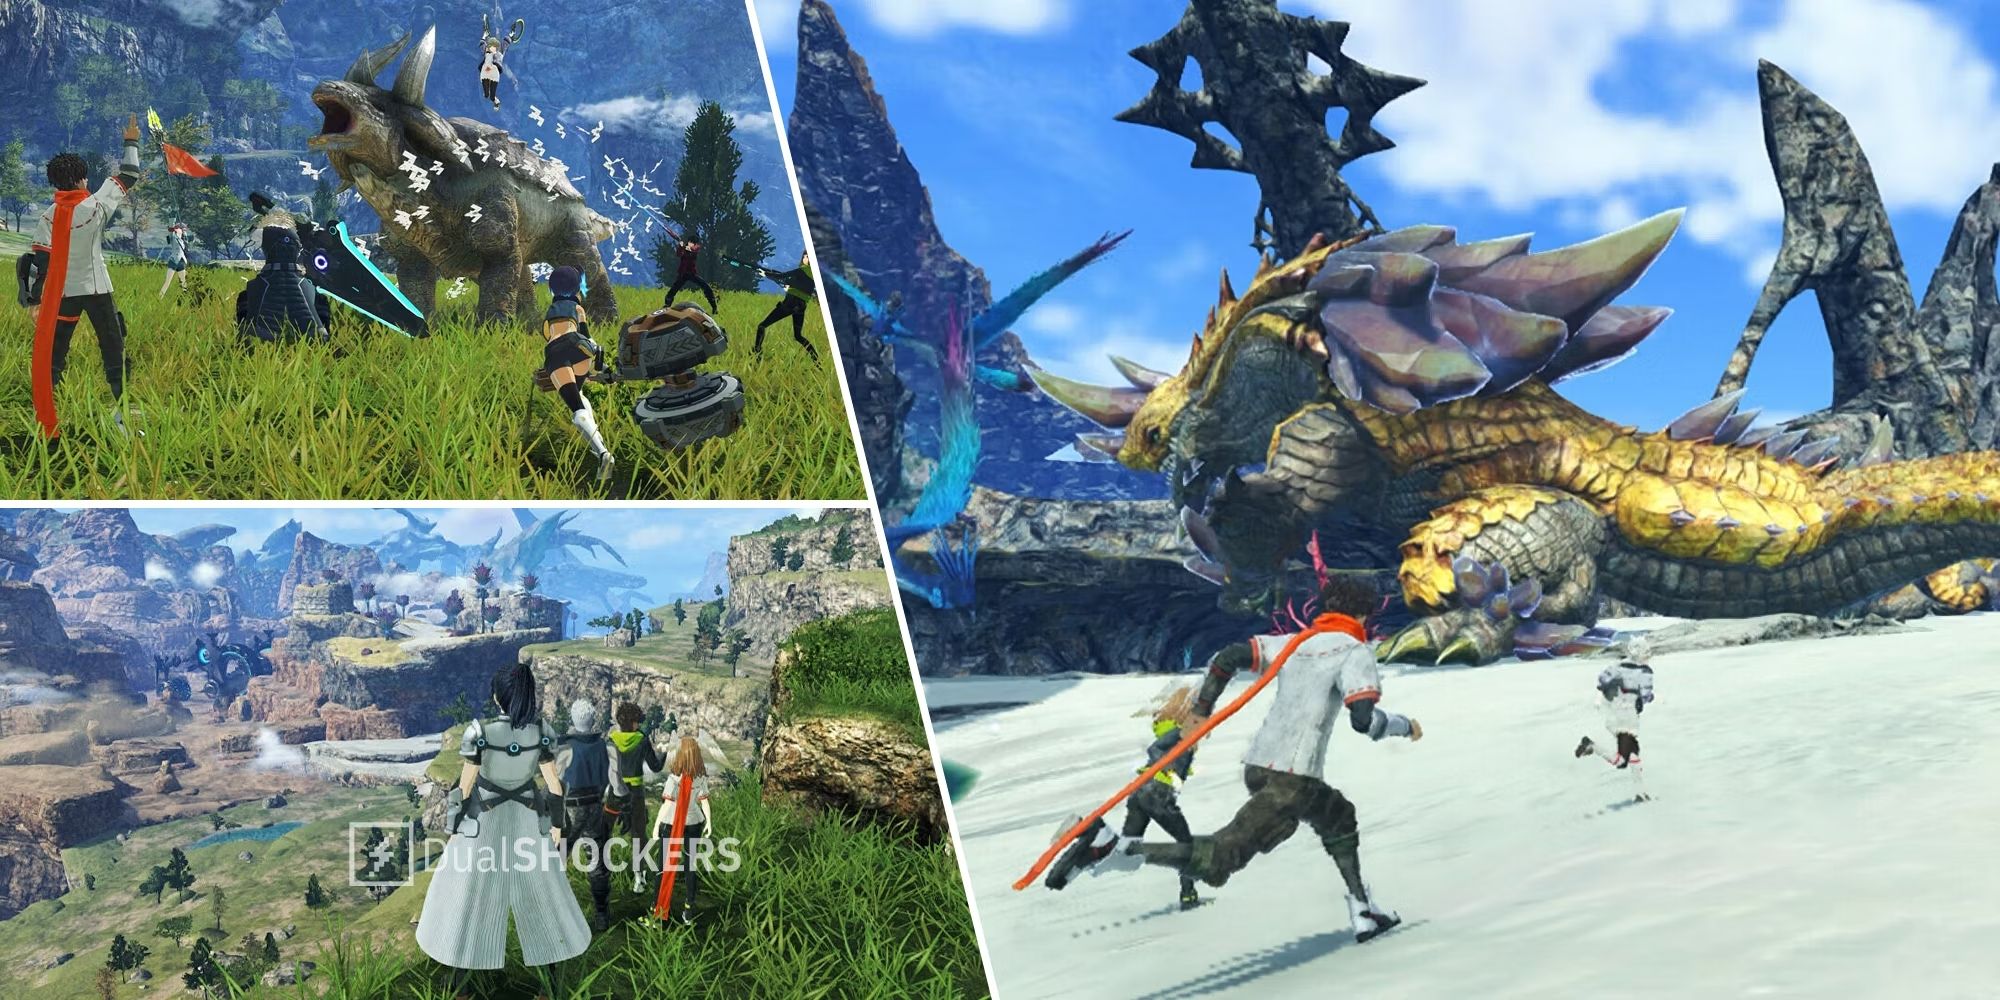 Xenoblade Chronicles 3 Volume 3 Adds New Character And Battle Mode